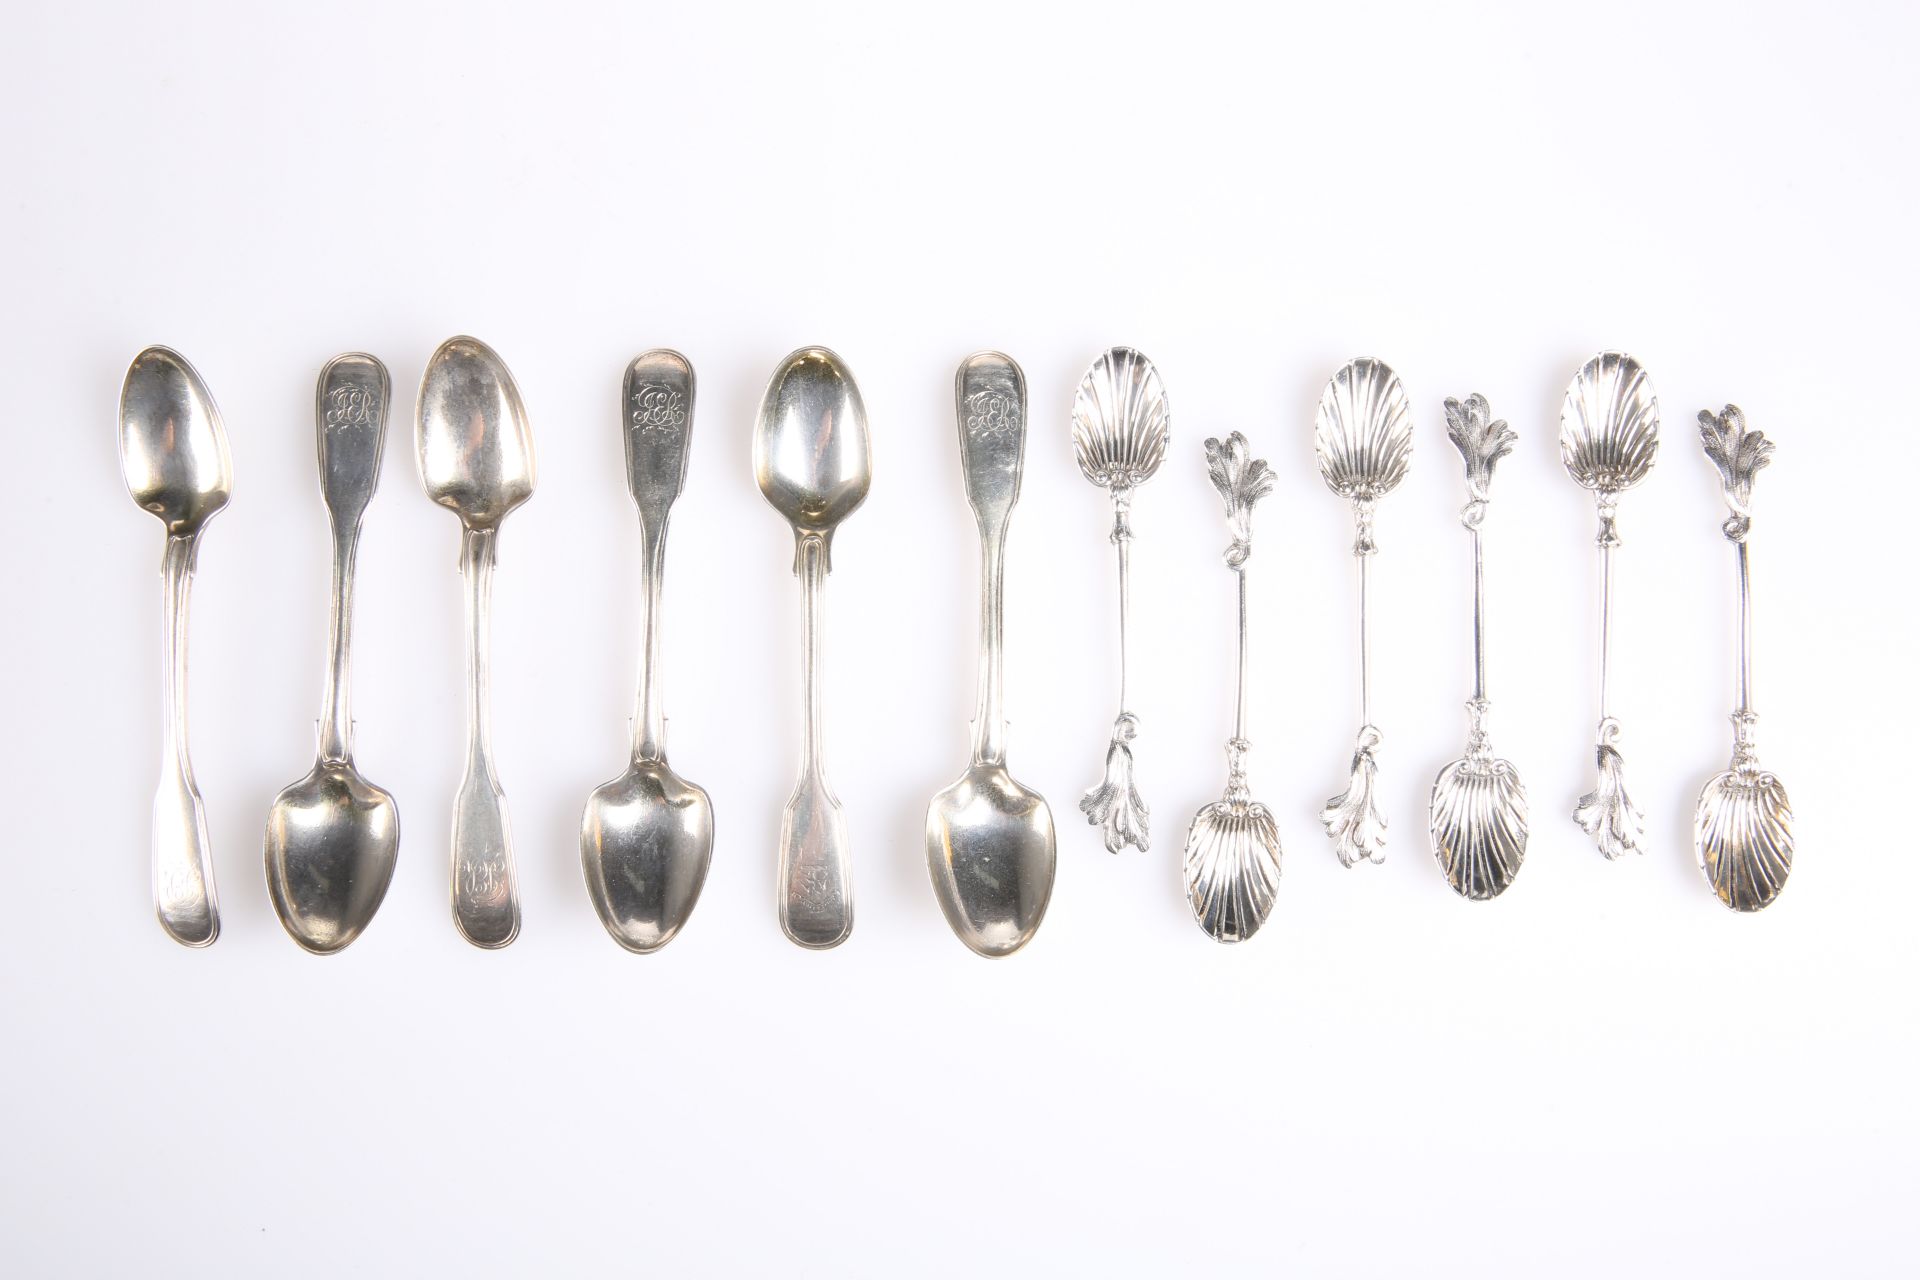 A SUITE OF SIX VICTORIAN SILVER TEASPOONS, by John Henry Williamson, London 1880, with scallop shell